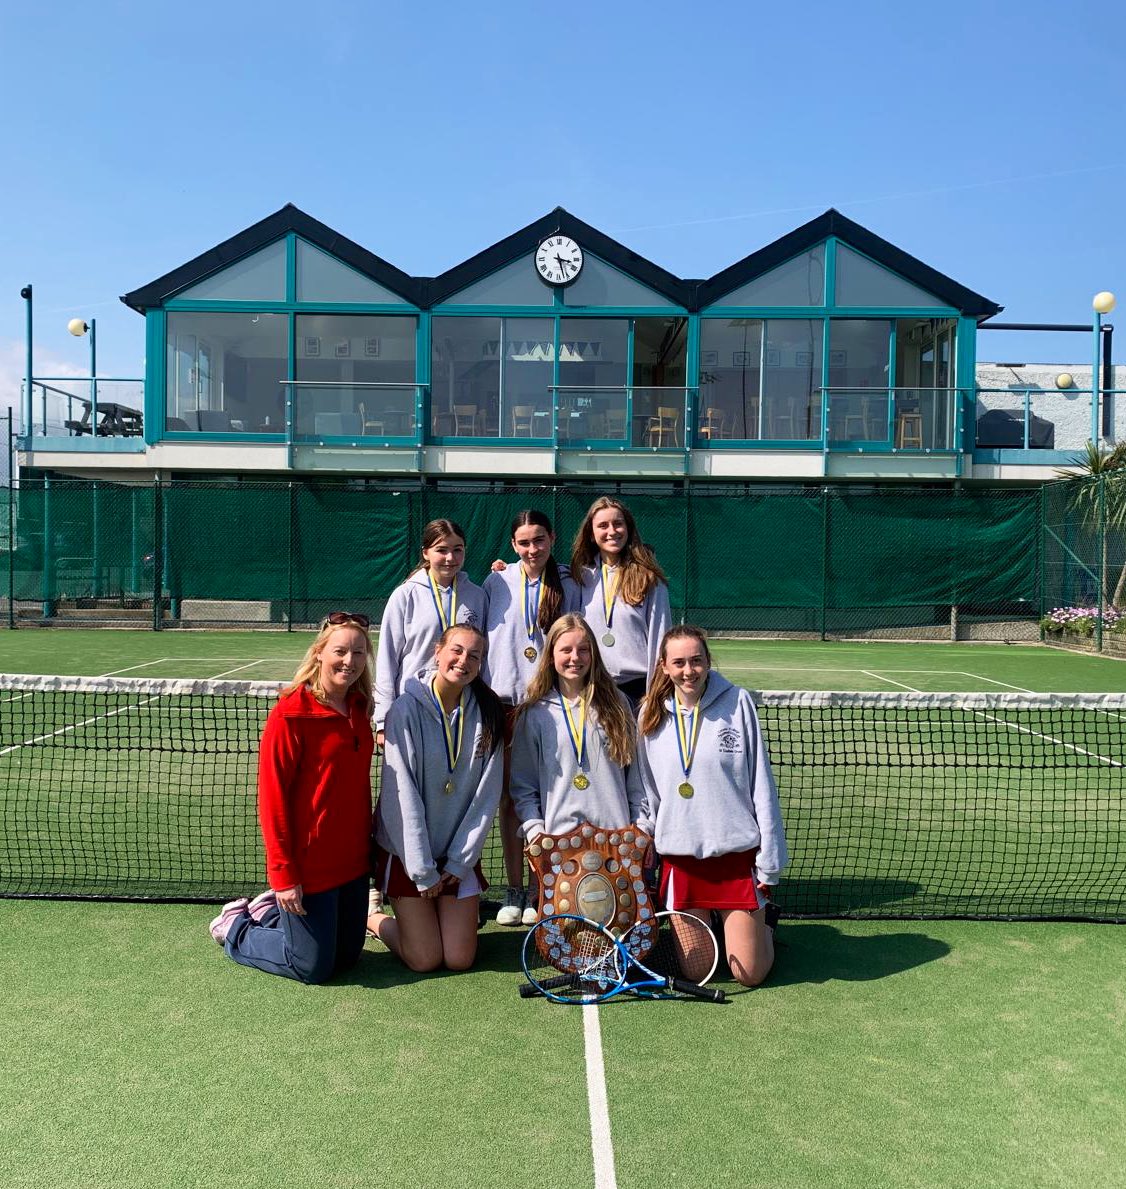 HUGE CONGRATS to our Junior A tennis team who won the Loreto Junior Tennis Tournament today; amazing tennis played by the team ! 🎾🥇🏆#loretosport